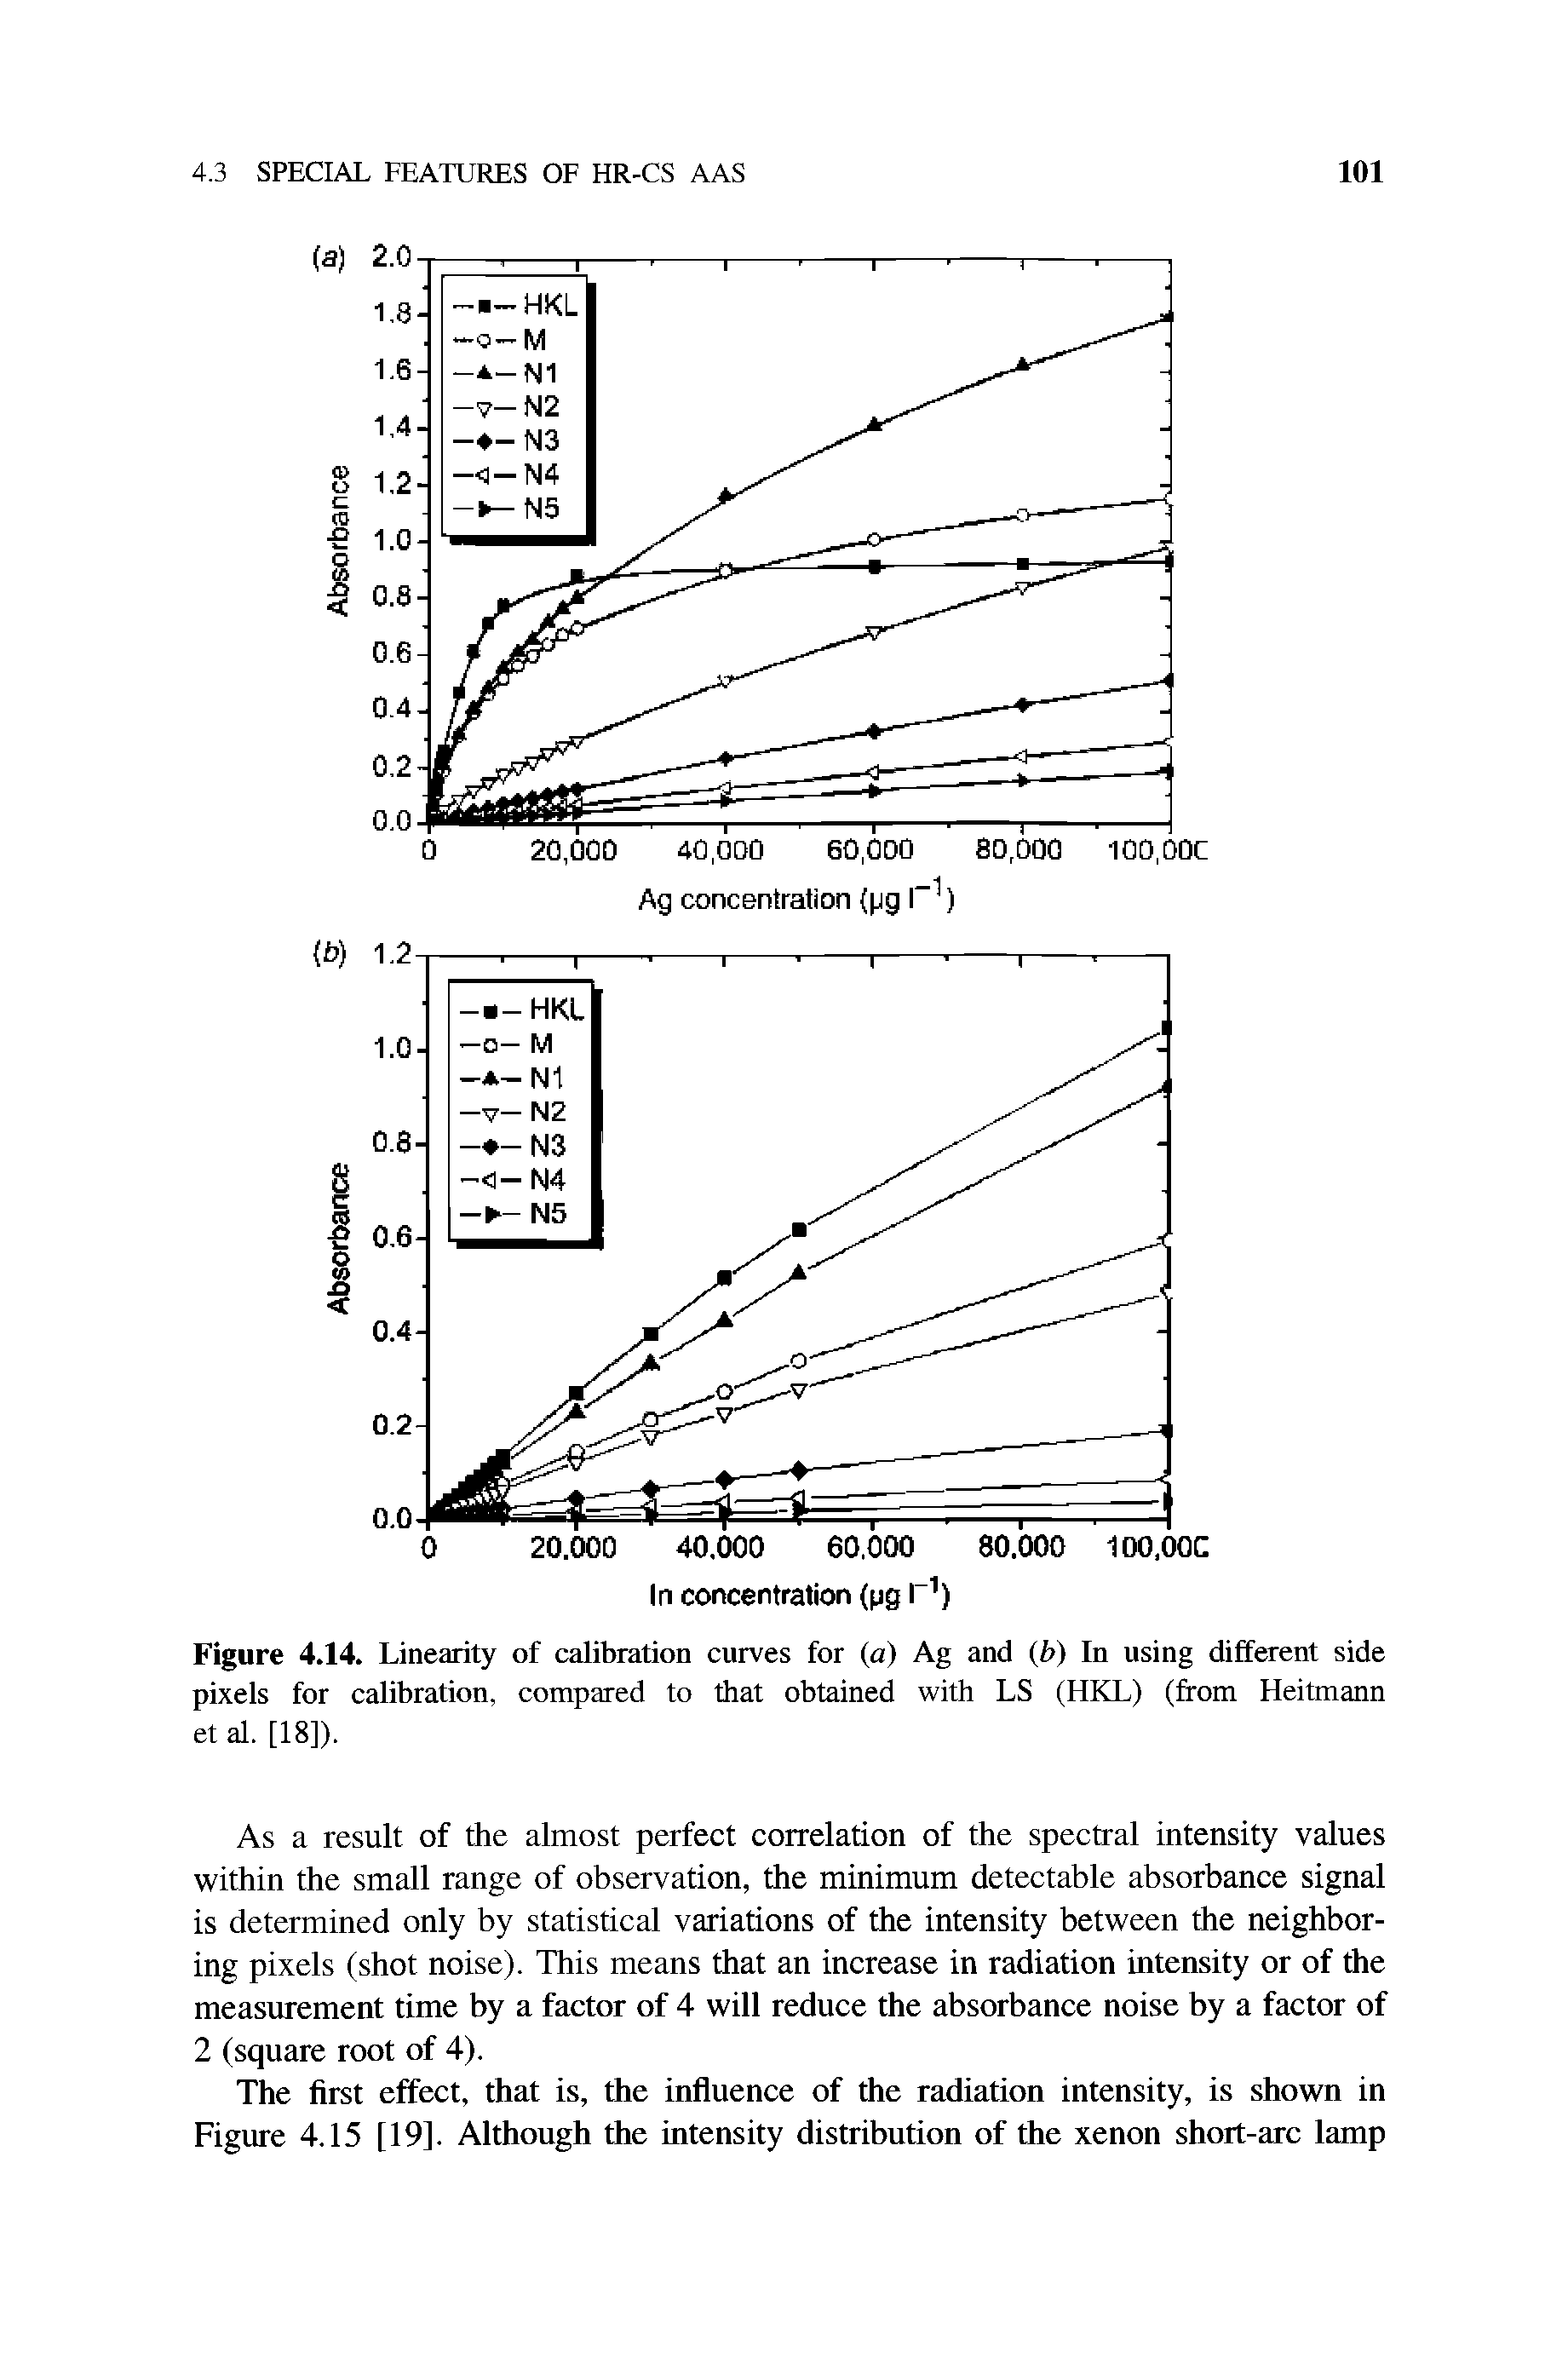 Figure 4.14. Linearity of calibration curves for (a) Ag and (b) In using different side pixels for calibration, compared to that obtained with LS (HKL) (from Heitmann et al. [18]).